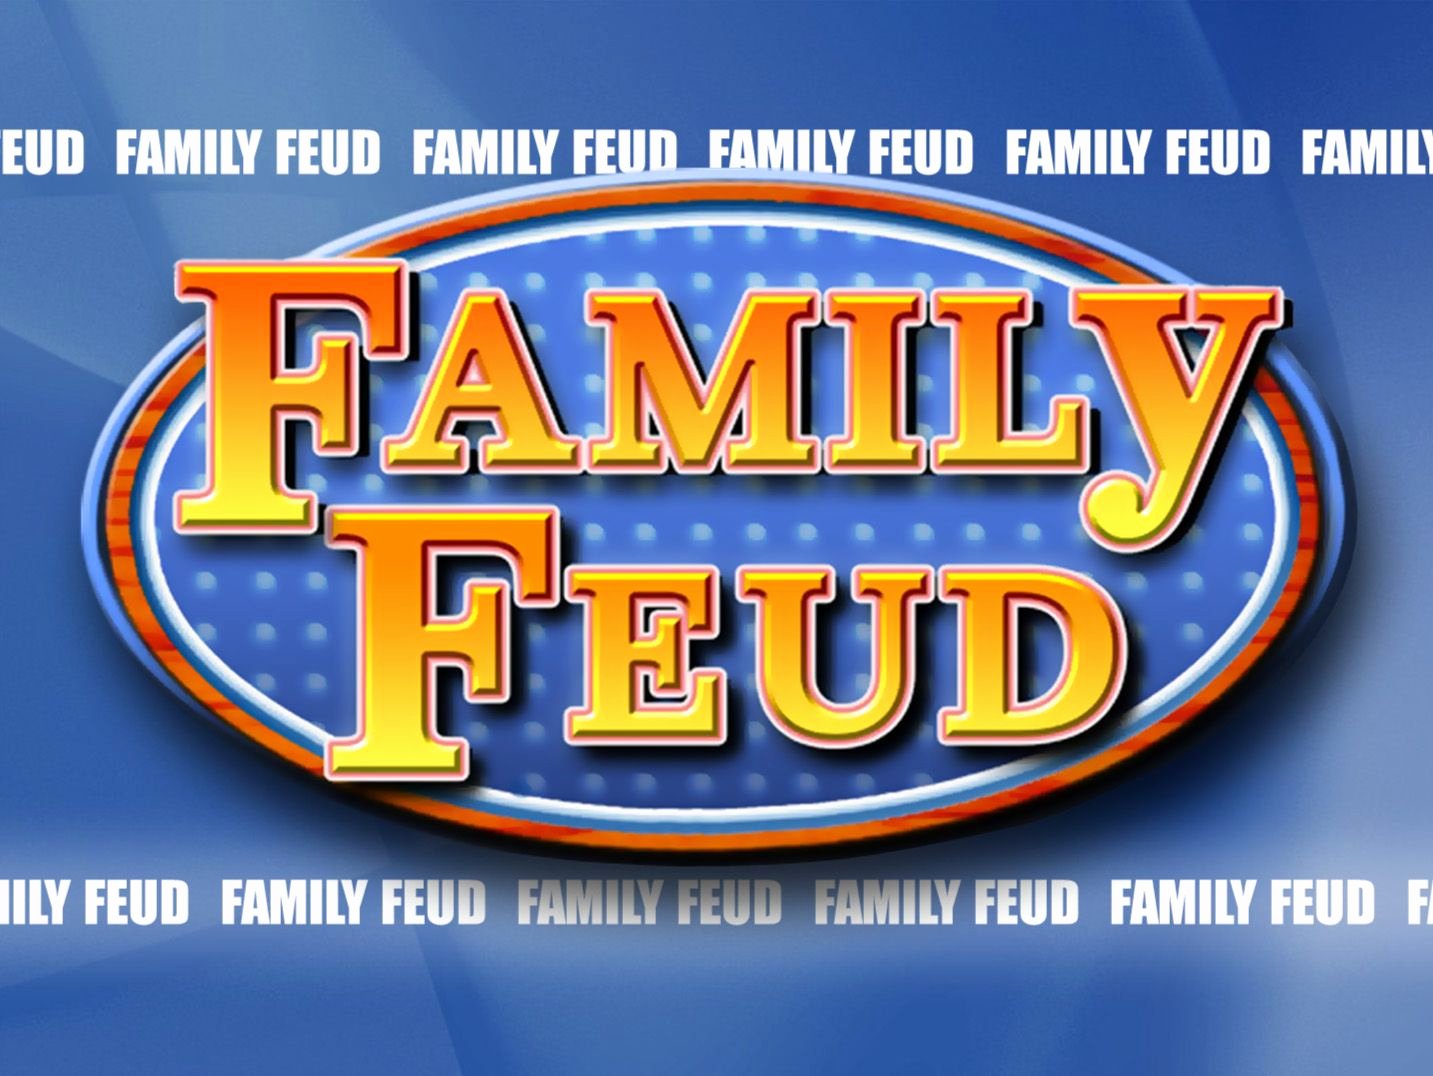 Family Feud Powerpoint Template 1